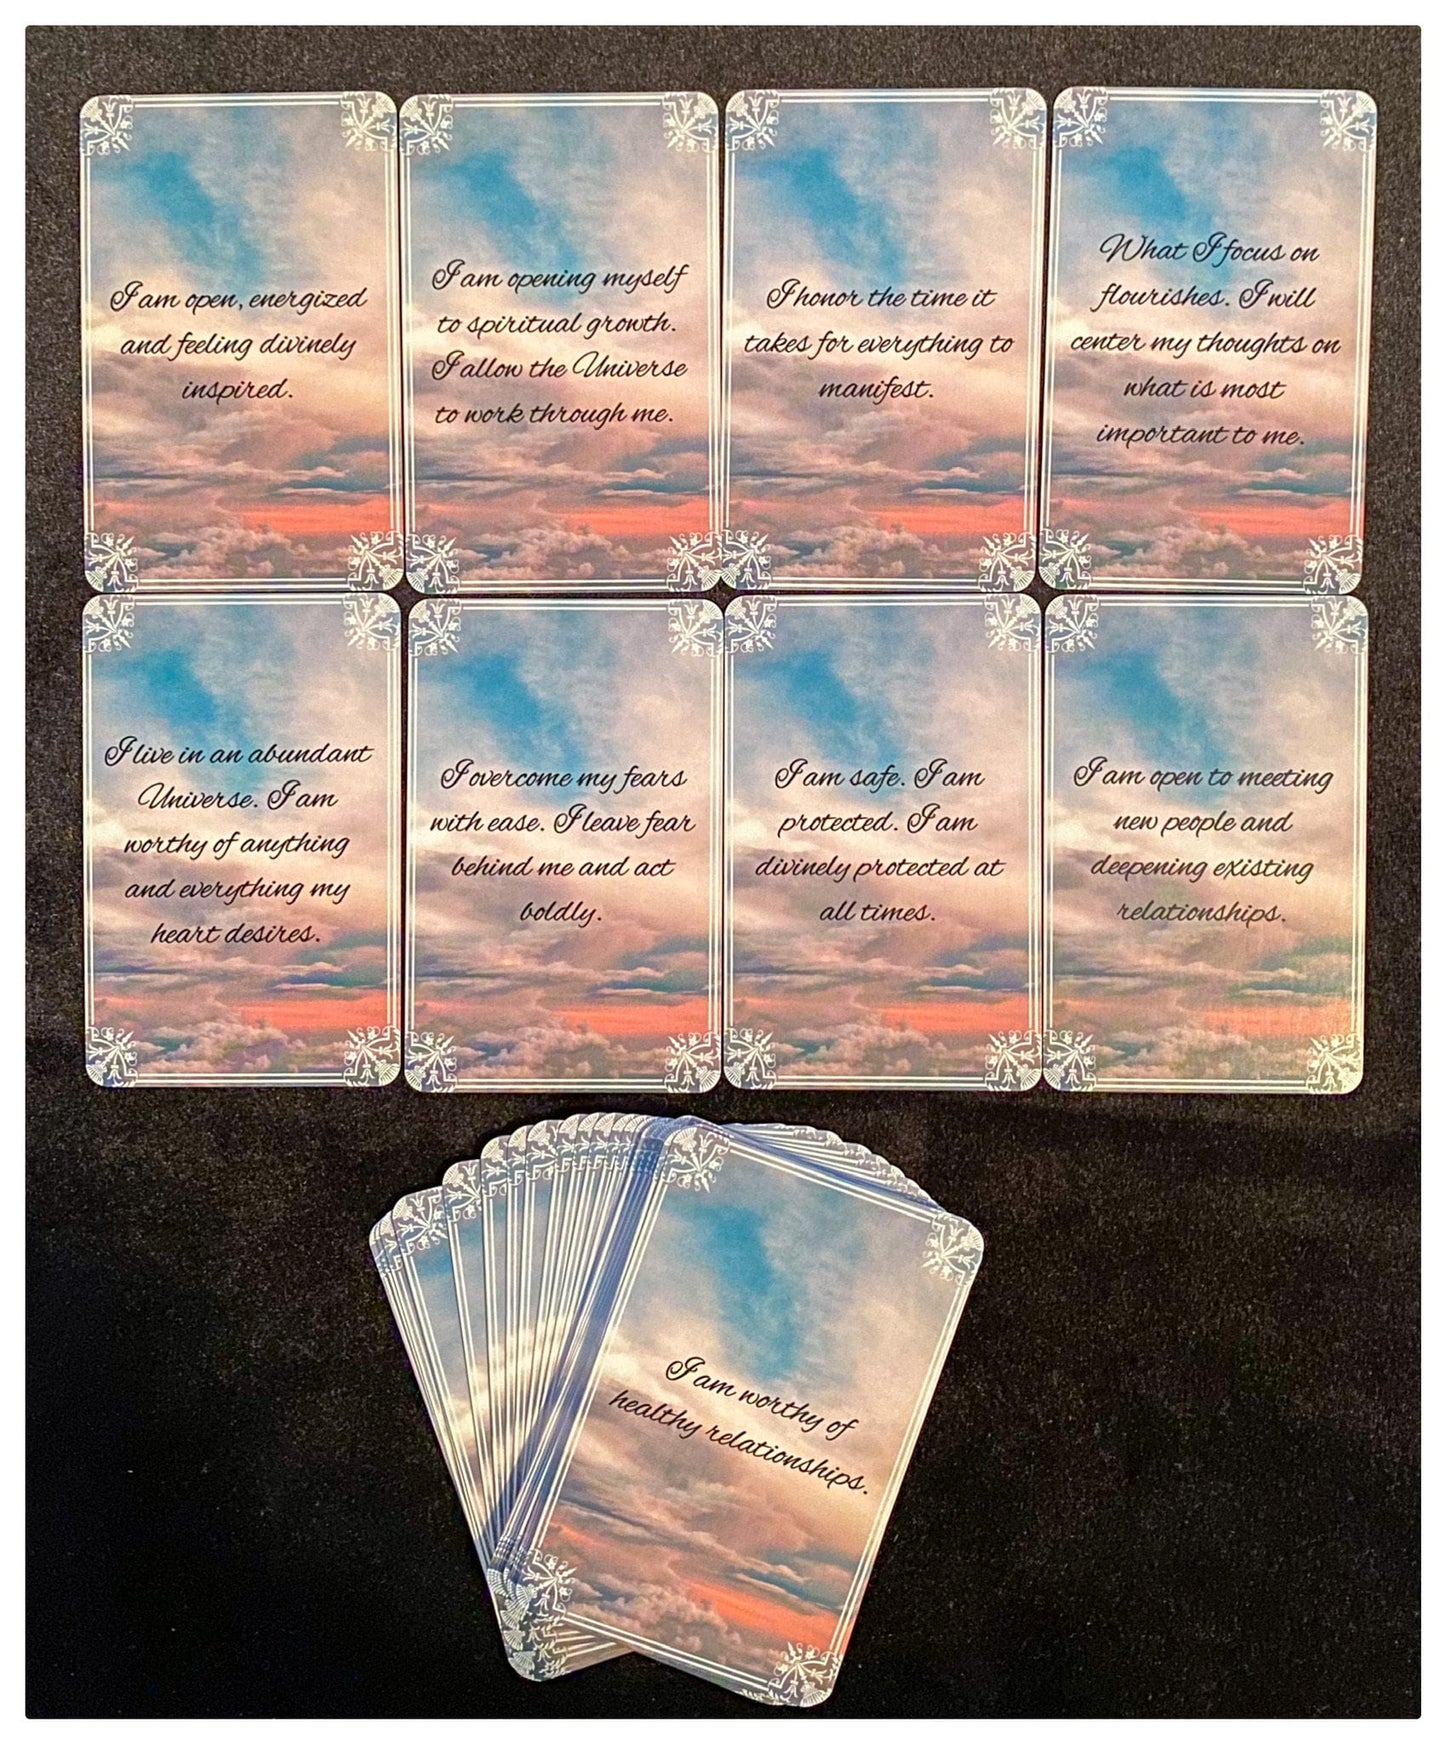 Positive Self Empowerment Cards, Daily Affirmations That Inspire You to Live Your Best Life, 50 Card Oracle Deck